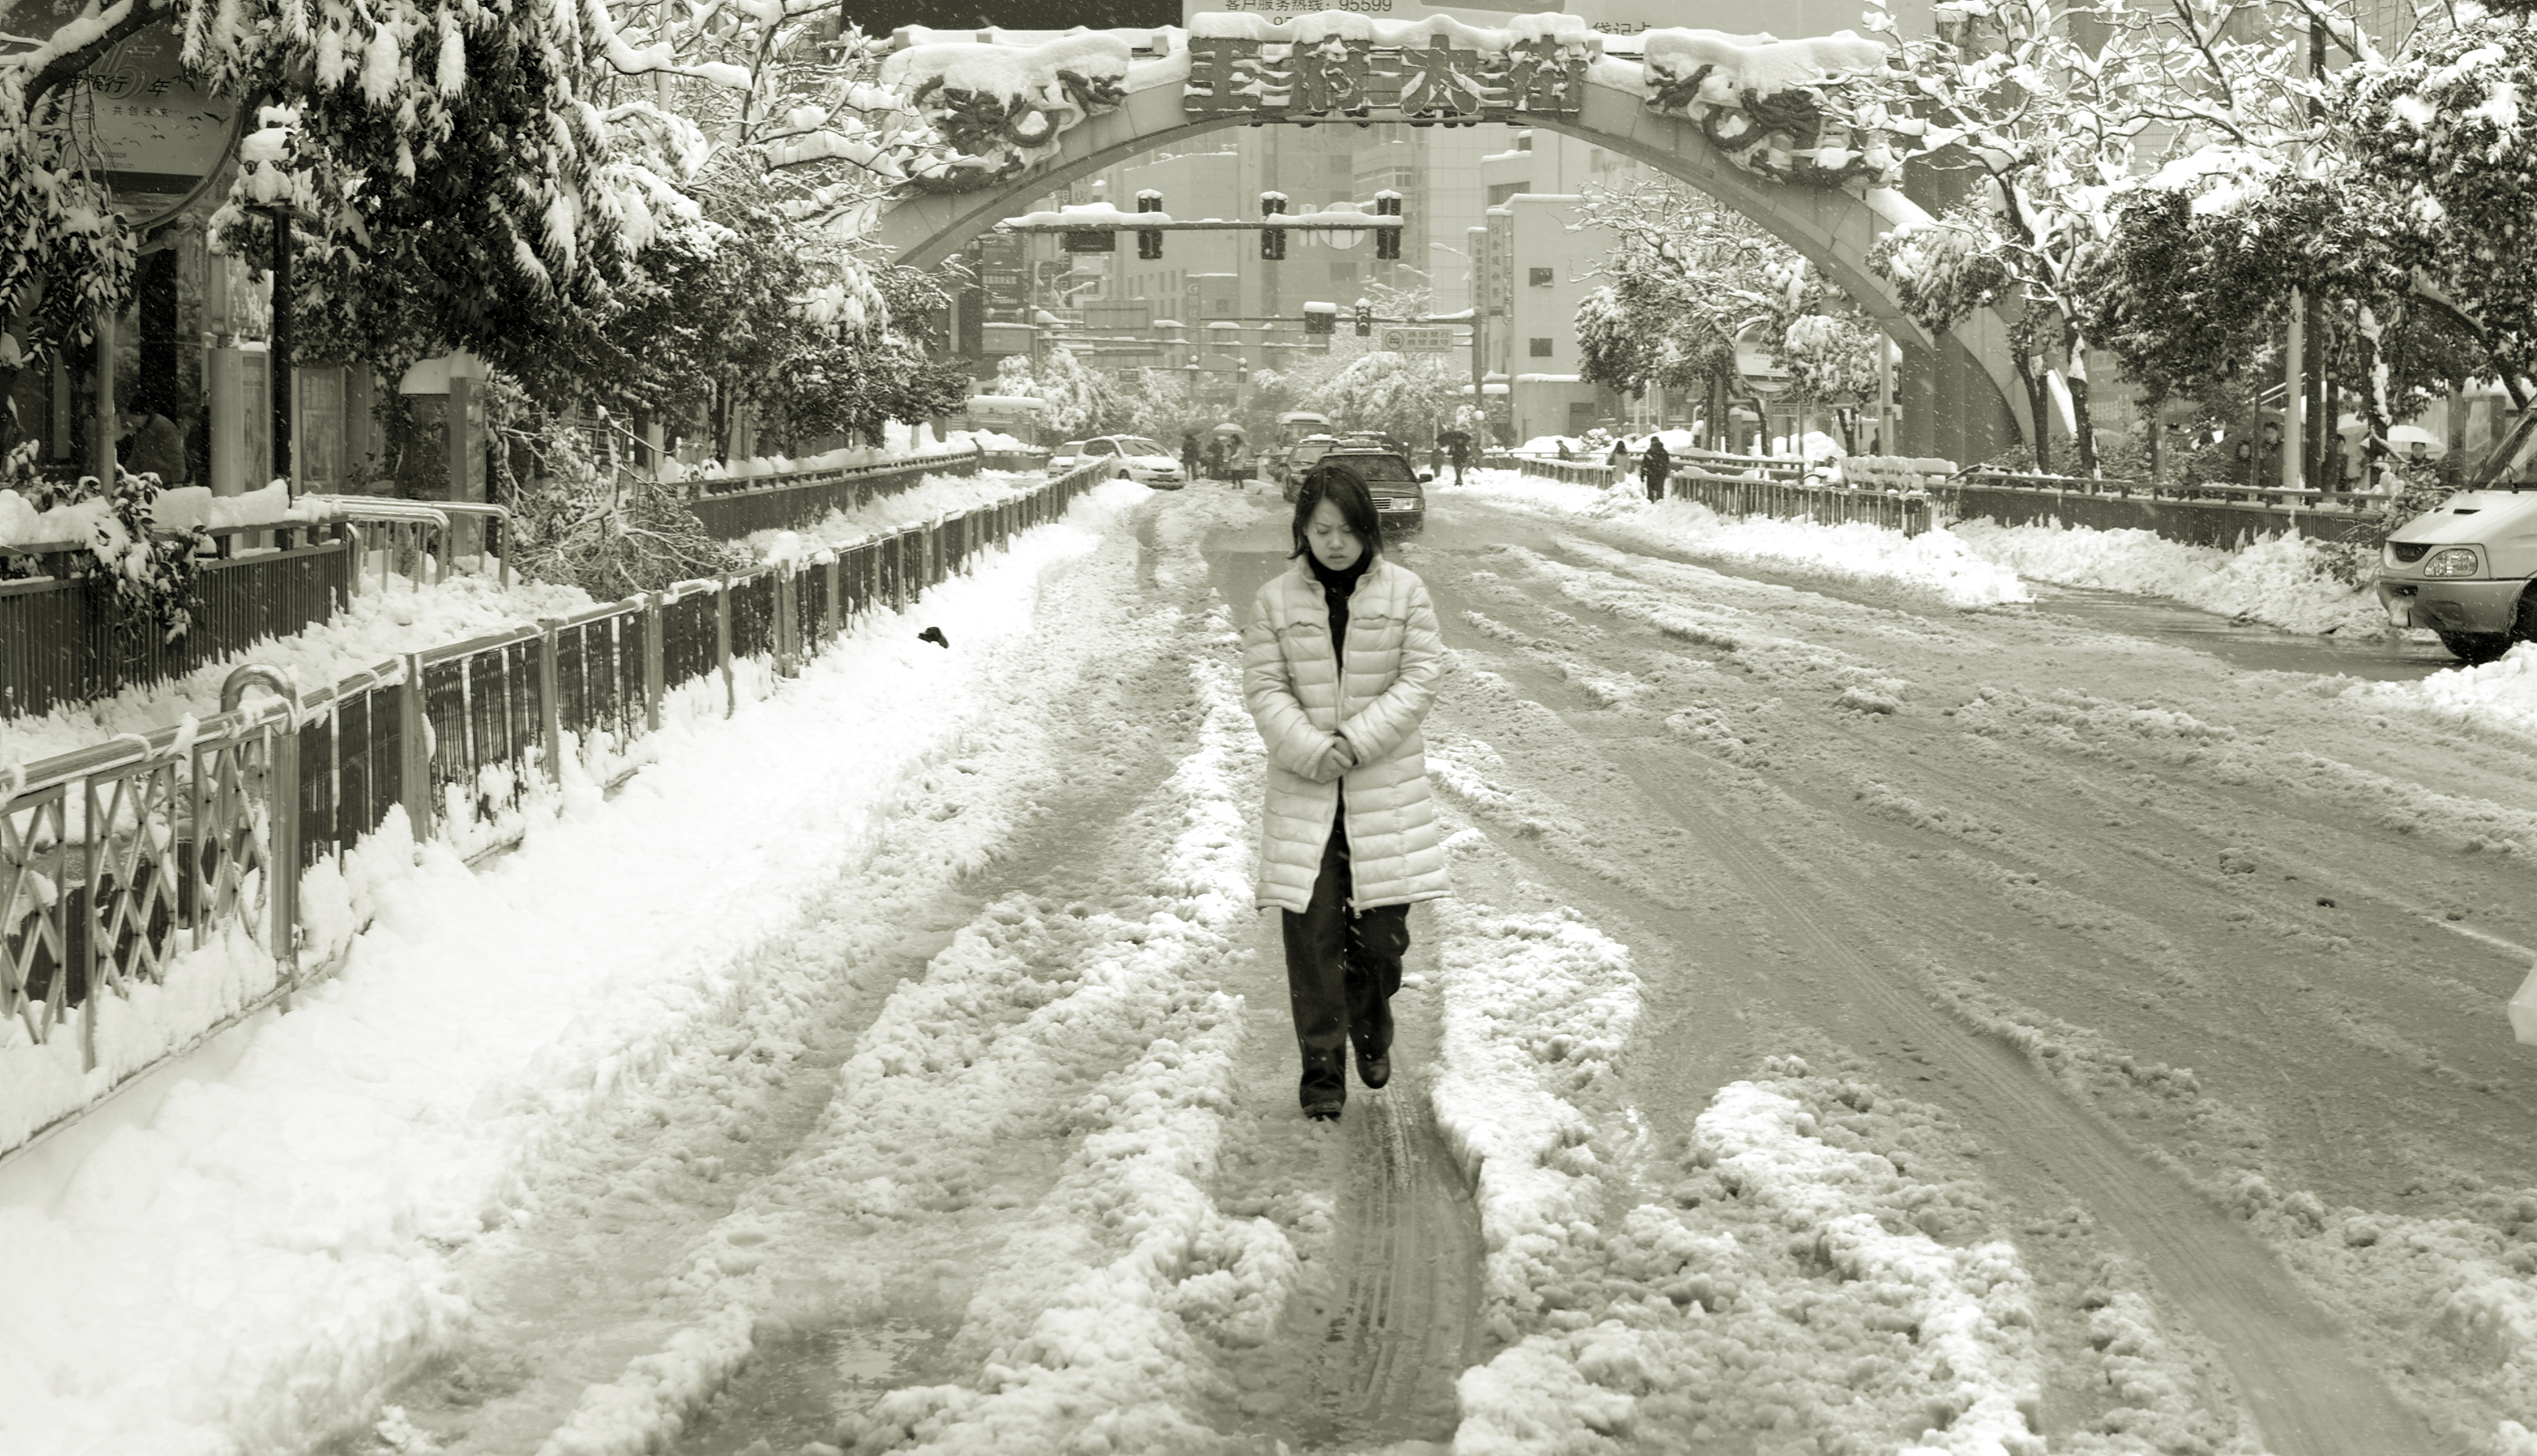 A woman is walking in the snow